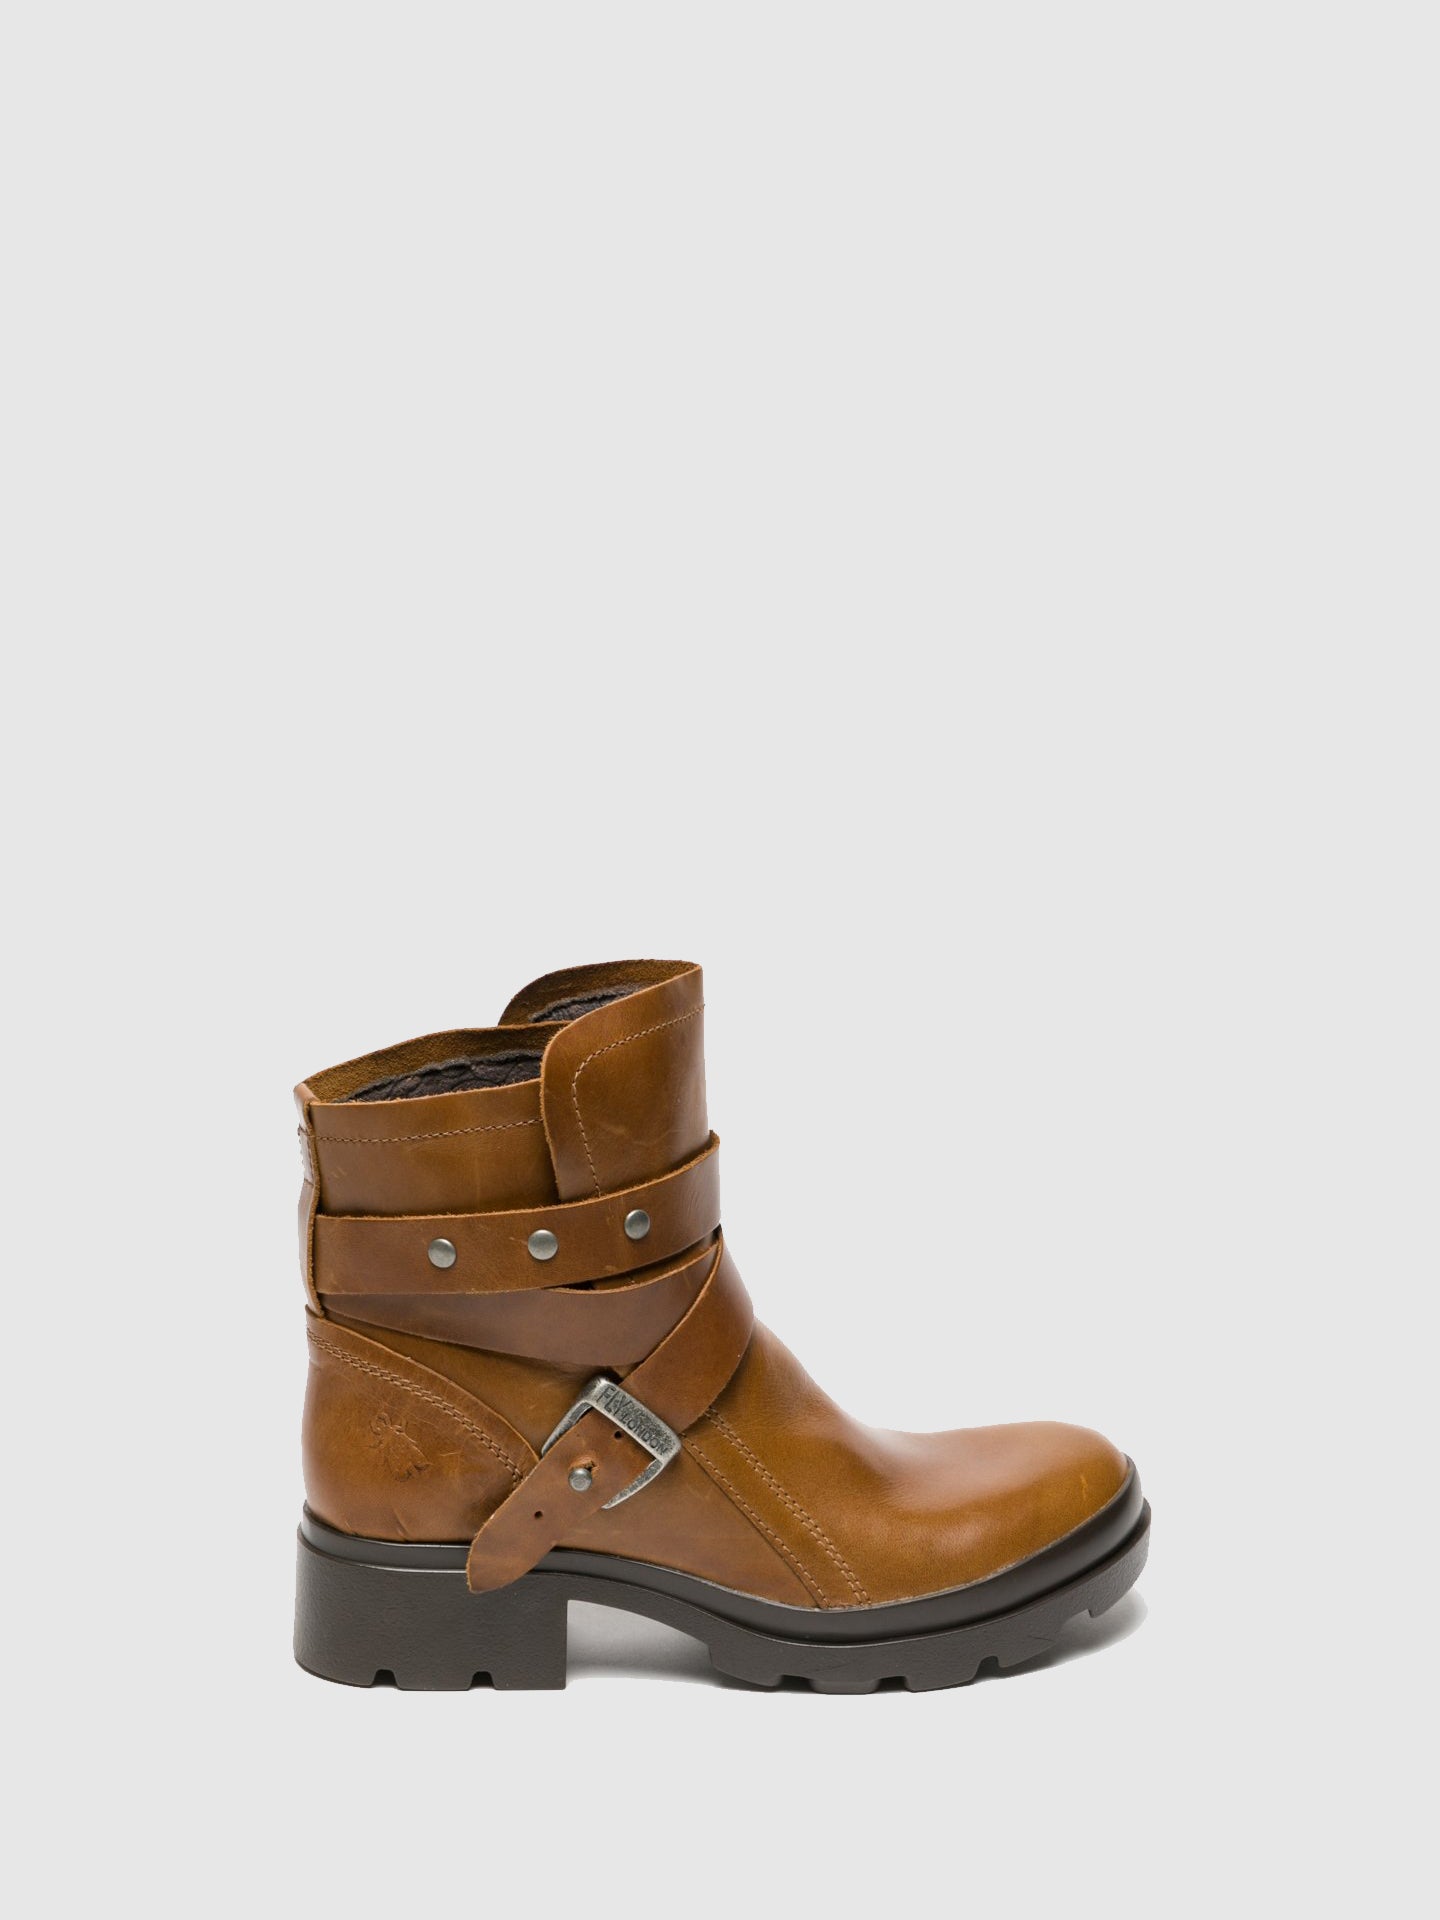 Fly London Peru Buckle Ankle Boots